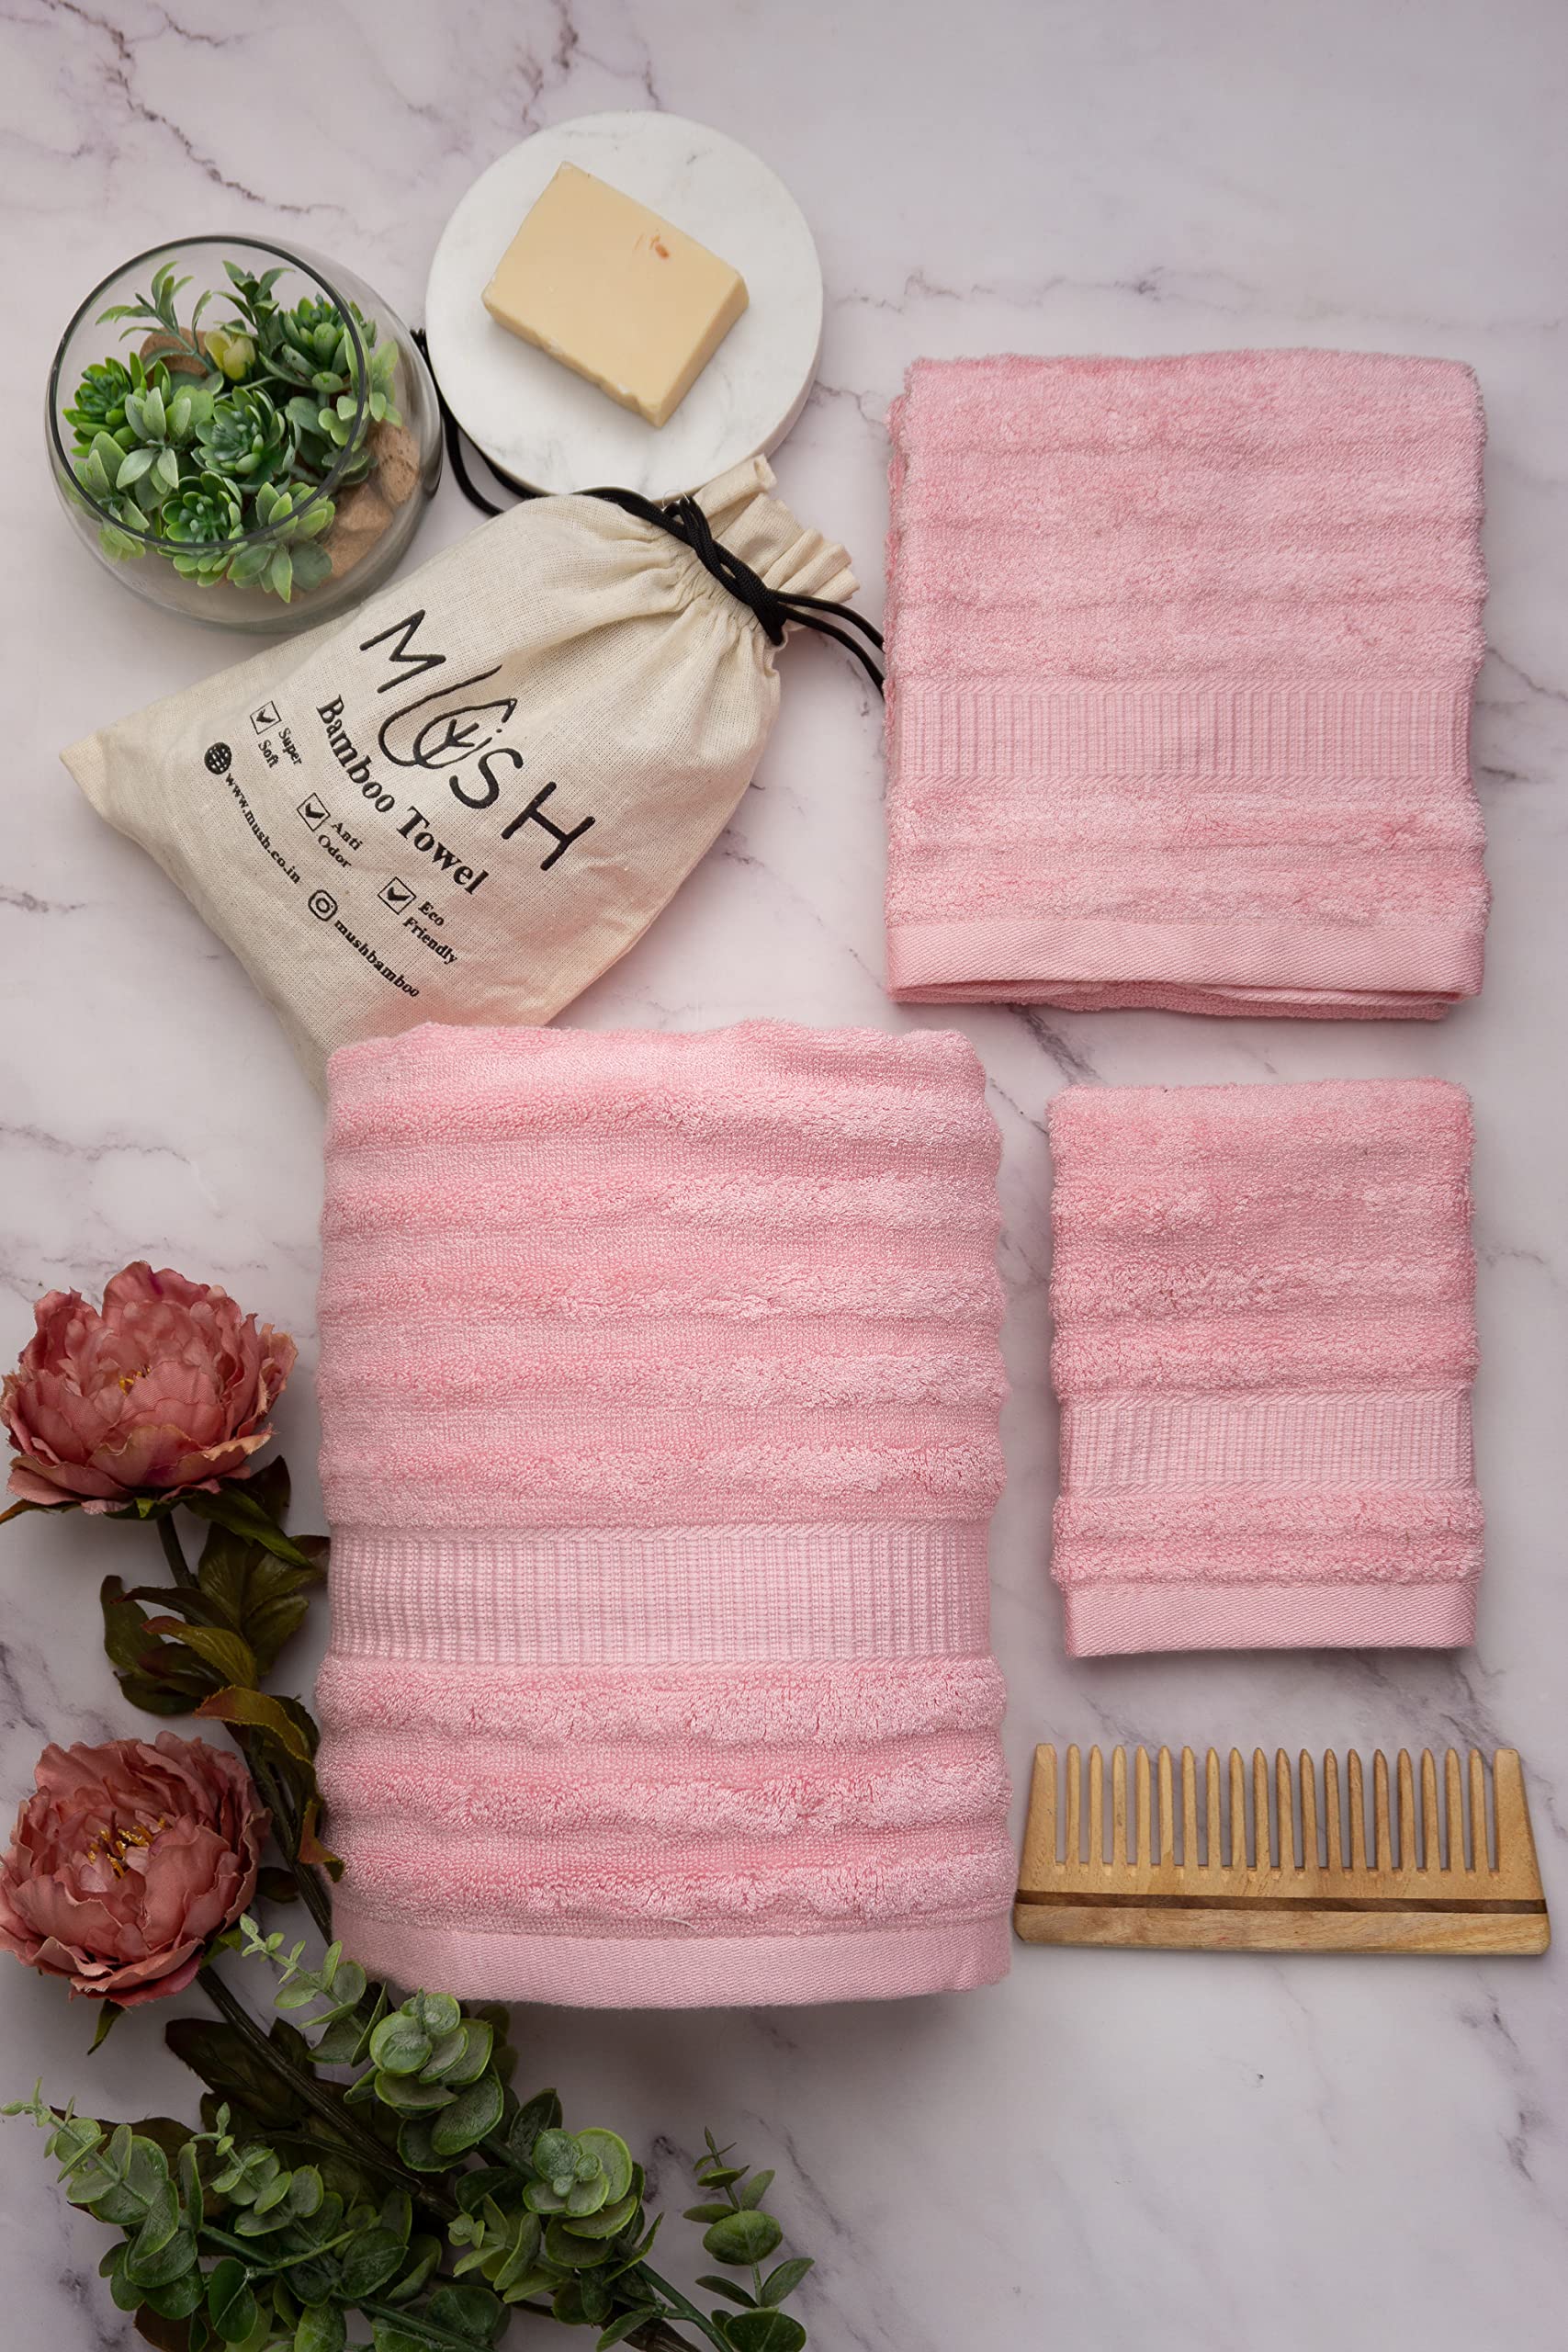 Mush Bamboo Luxurious 3 PieceTowels Set | Ultra Soft, Absorbent and Antimicrobial 600 GSM (Bath Towel, Hand Towel and Face Towel) Perfect for Daily Use and Gifting (Pink)